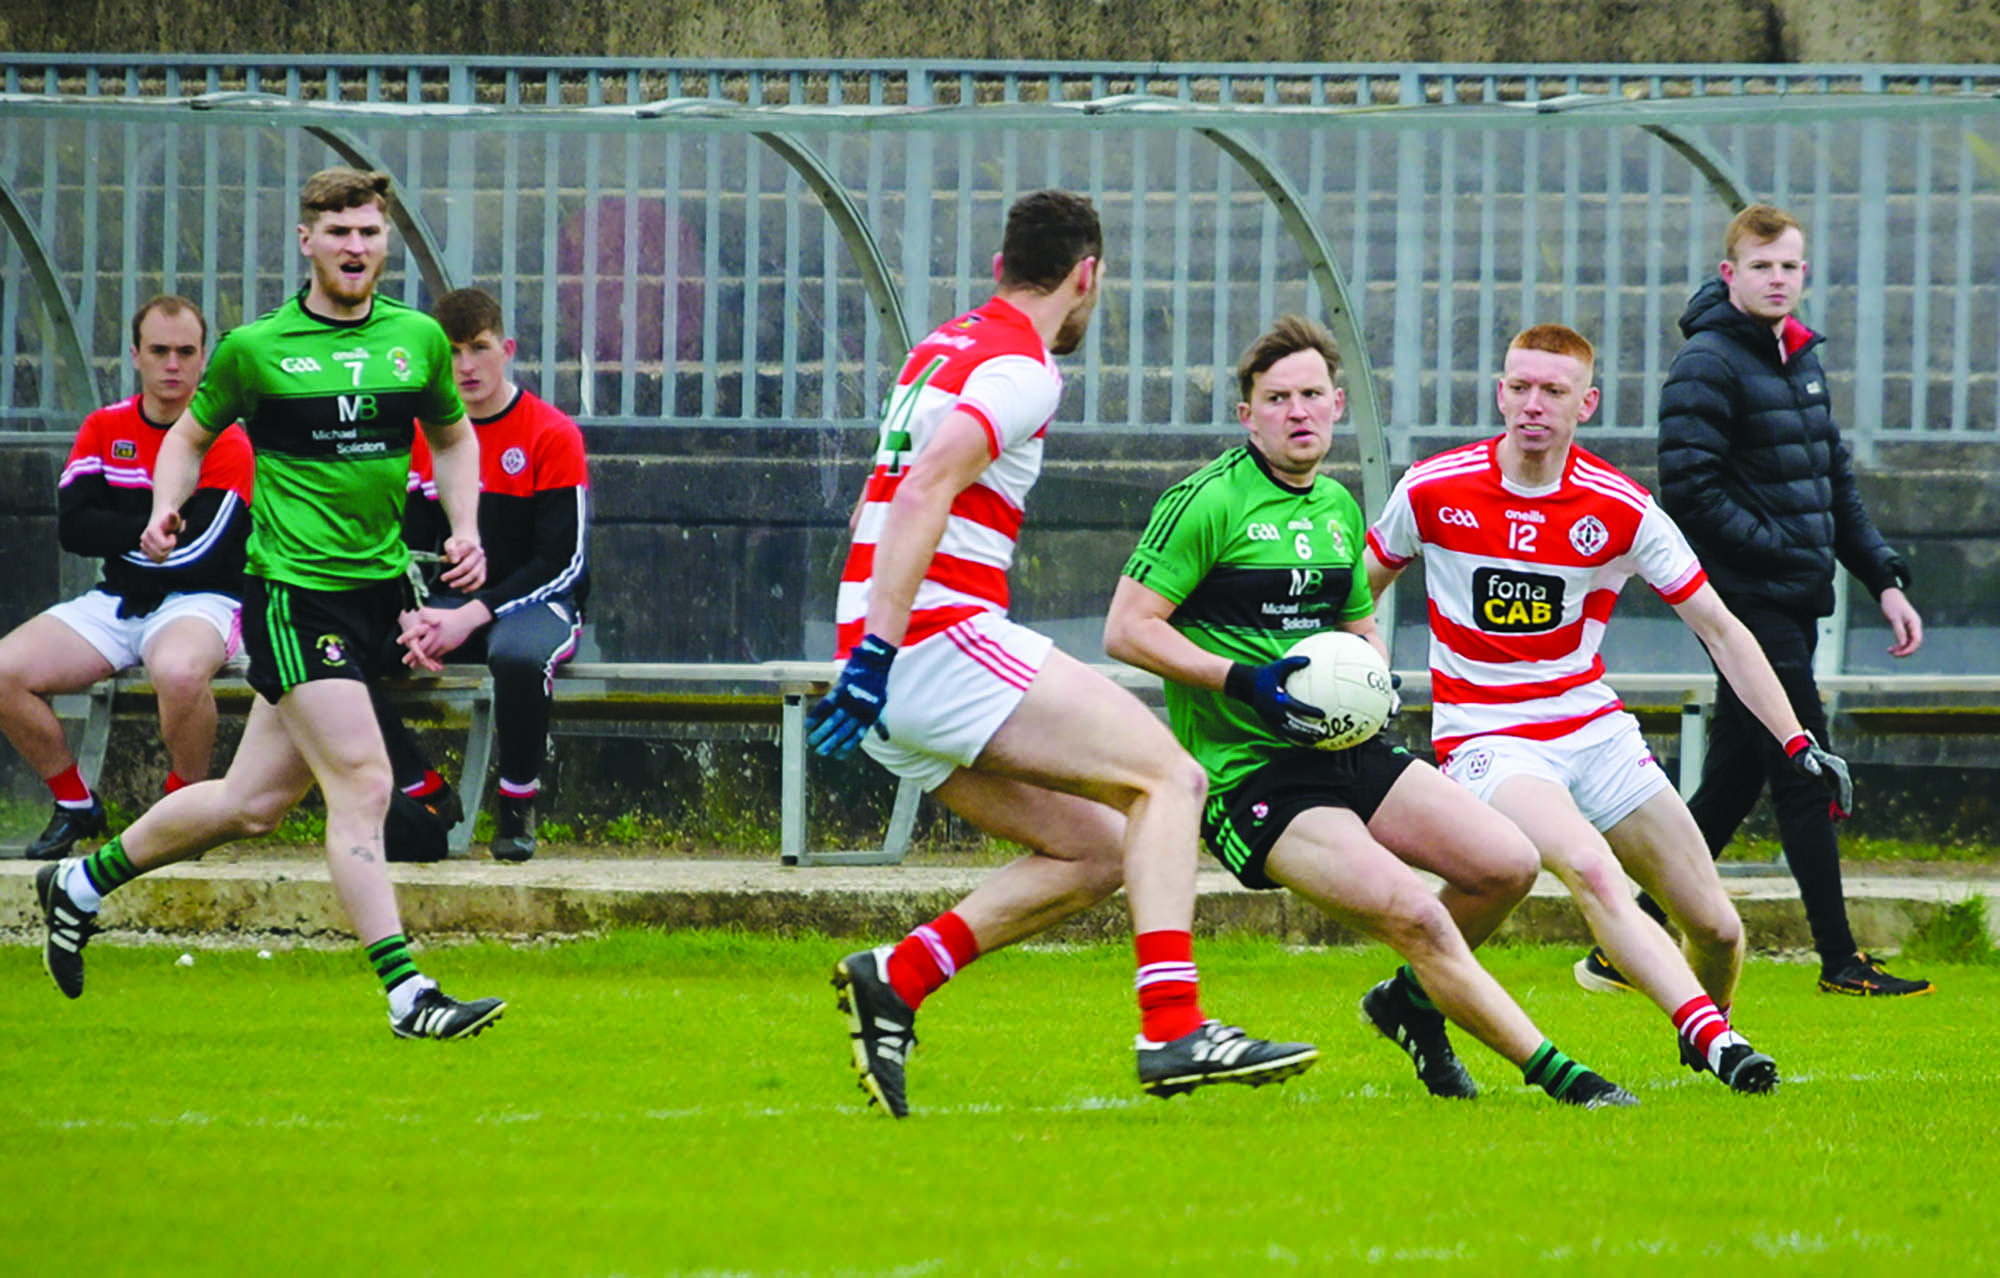 St Paul’s won the meeting with Sarsfield’s at the Bear Pit in the league